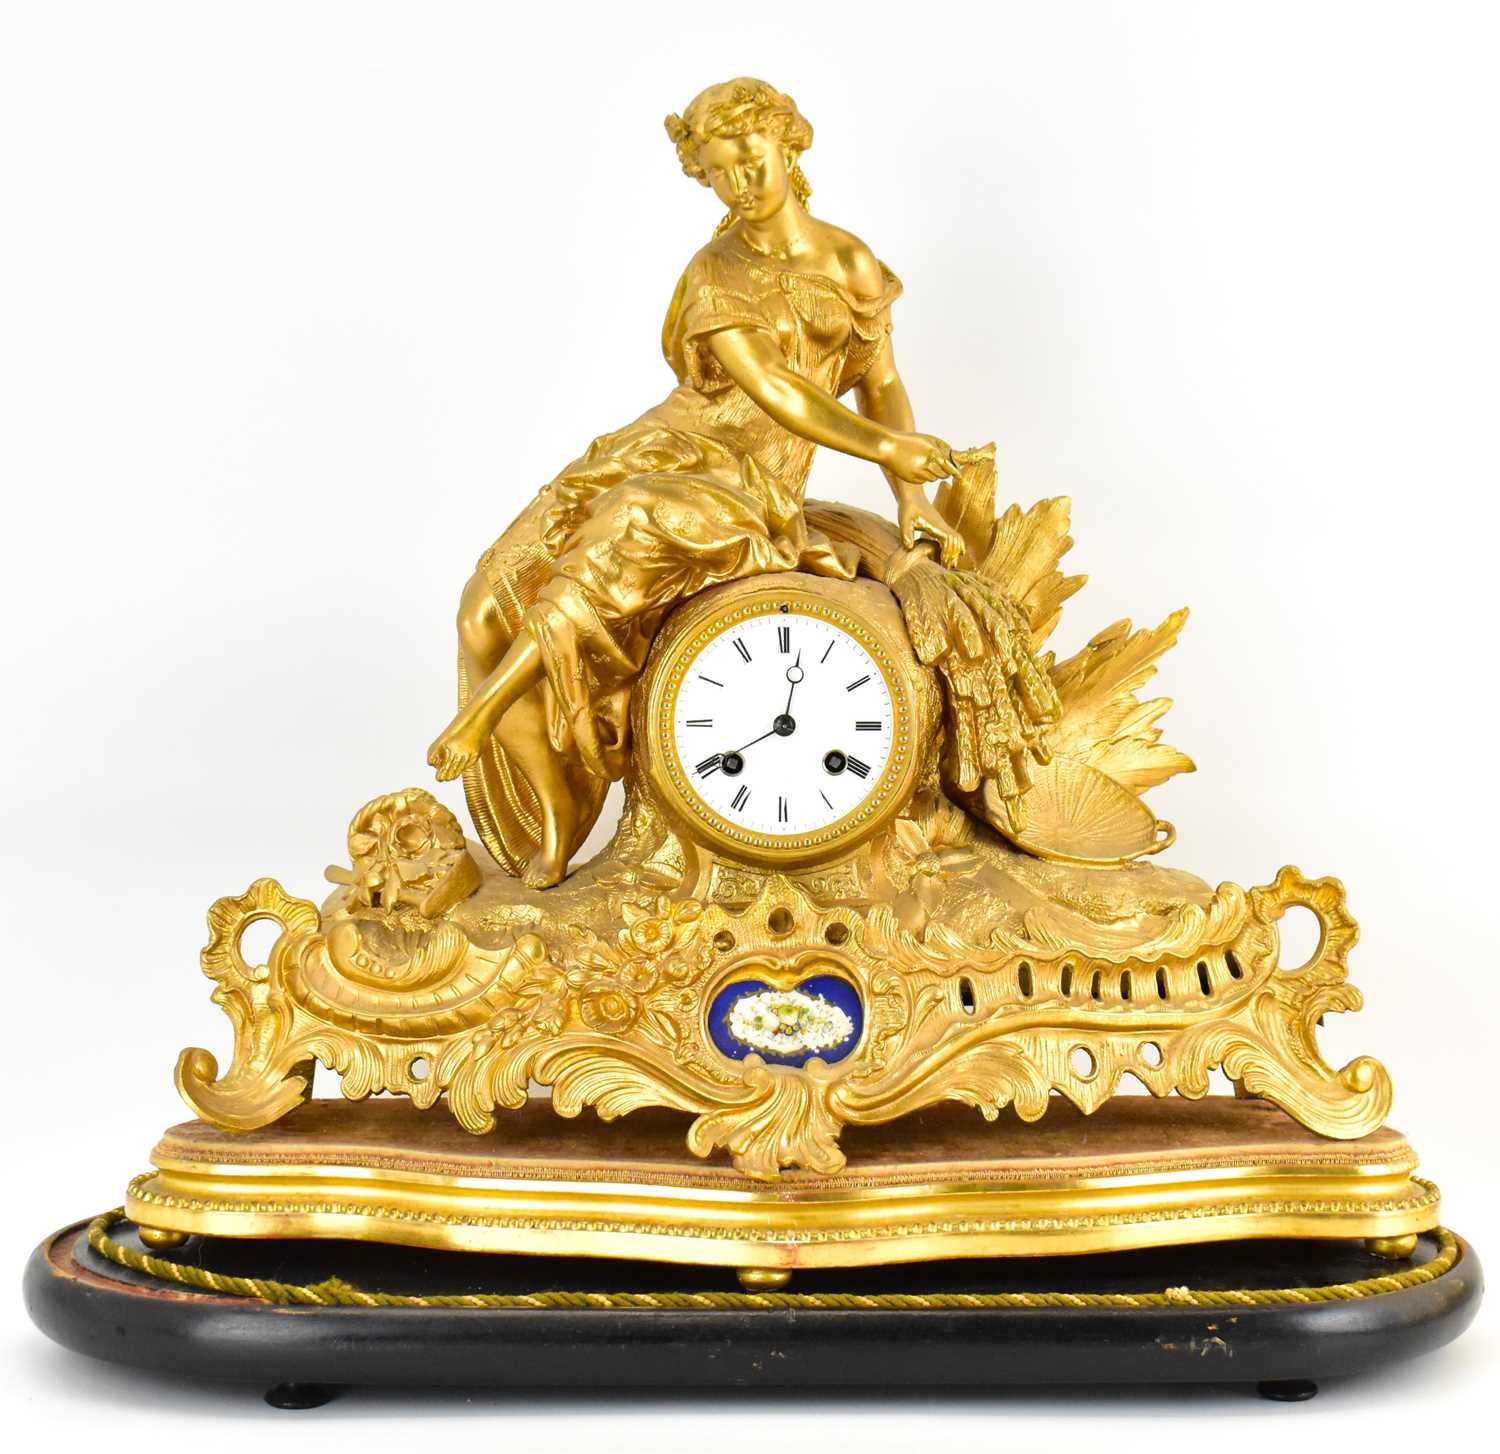 A 19th century gilt metal mantel clock, the white enamelled dial set with Roman numerals and two key